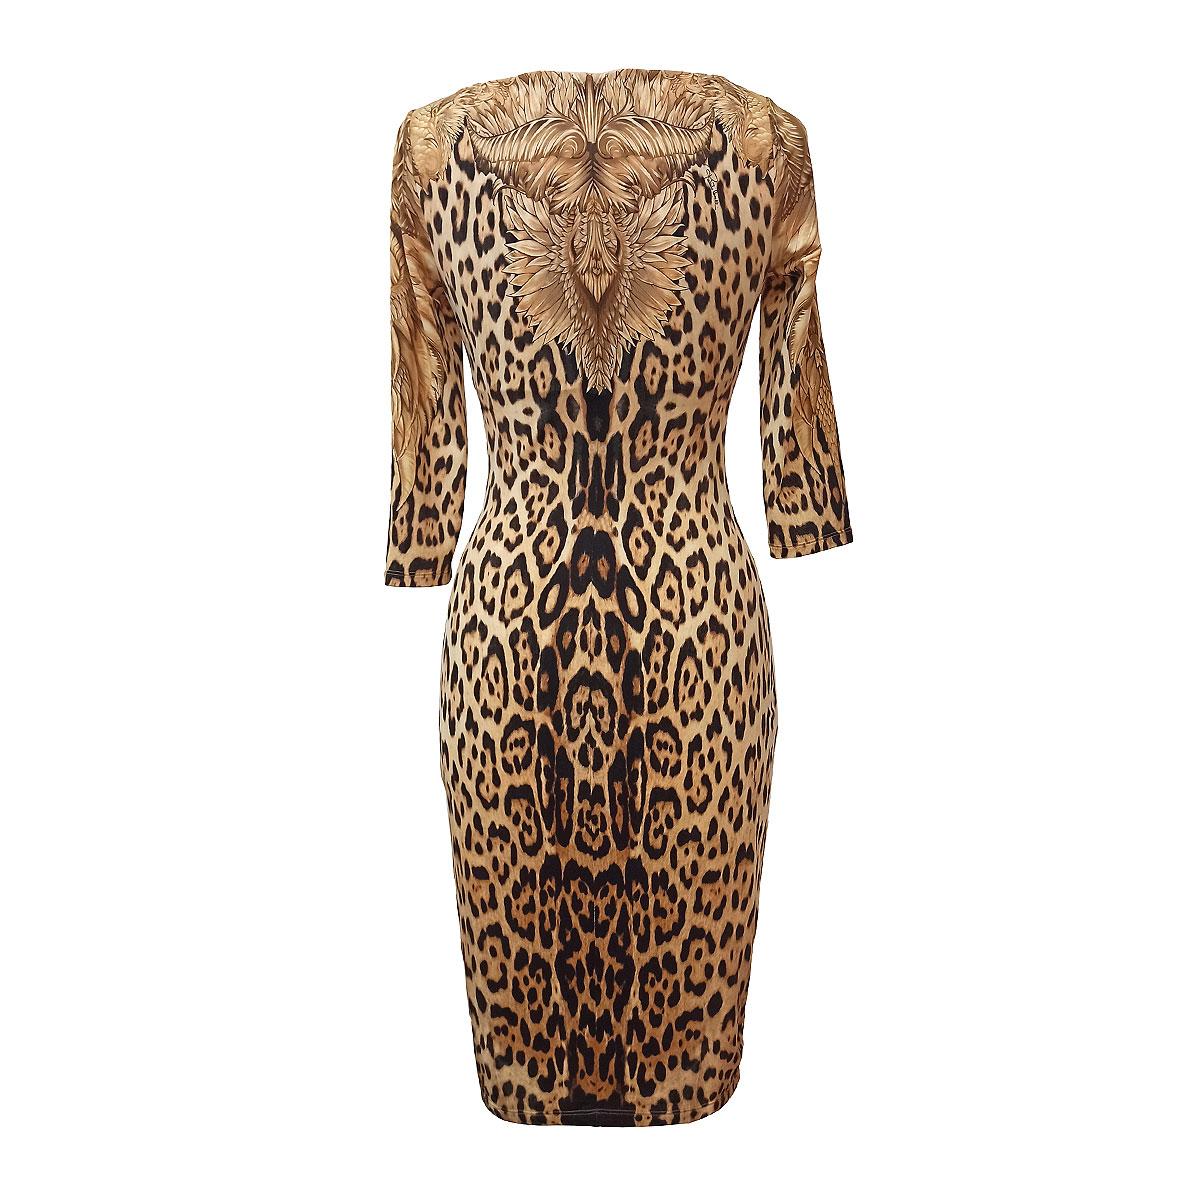 Beautiful Roberto Cavalli dress
Fabric and size tags removed
Animalier print
3/4 sleeve
Total length cm 94 (37 inches)
Shoulders cm 33 (12,99 inches)
Worldwide express shipping included in the price !